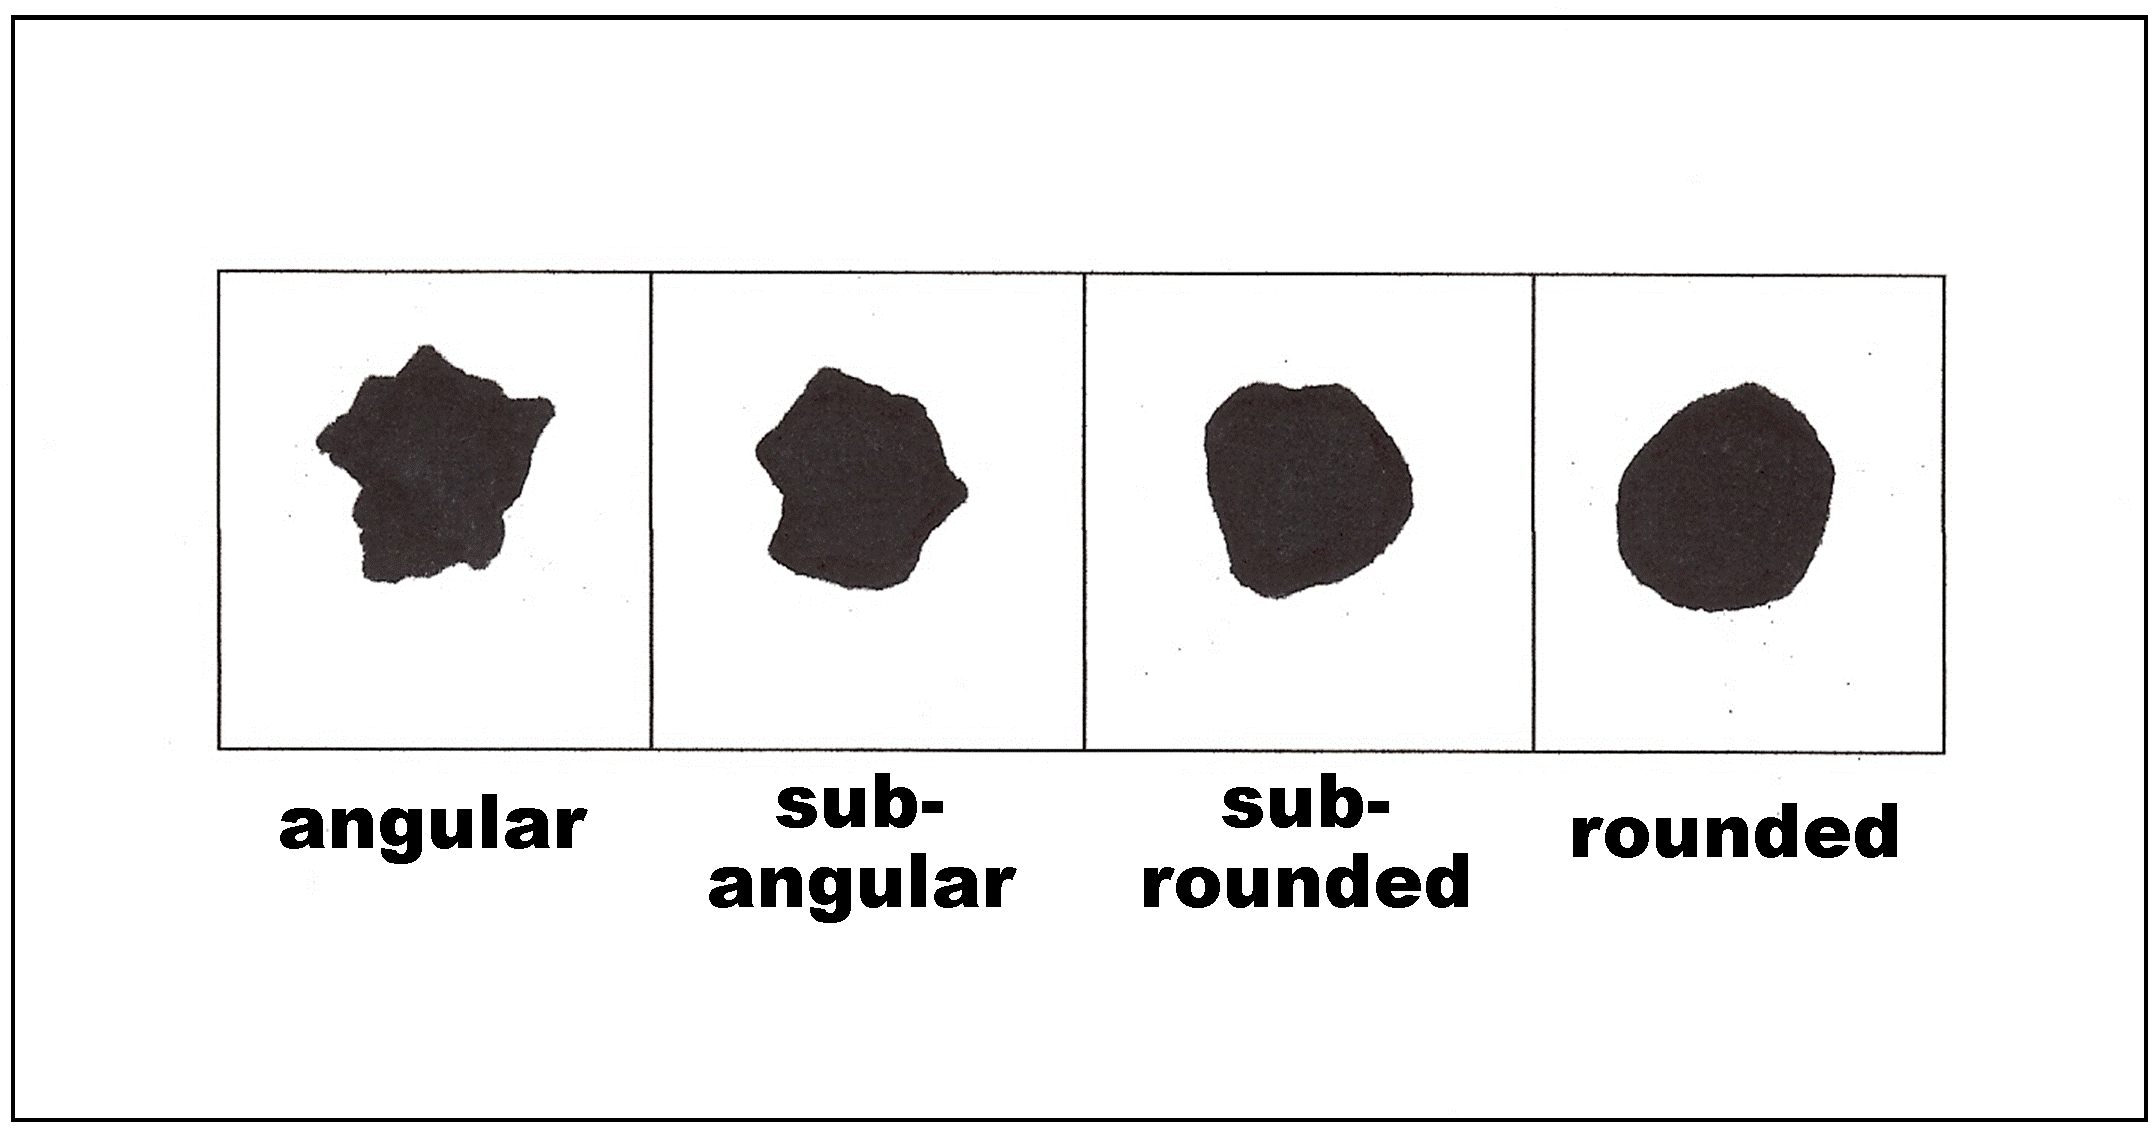 schematic diagram of four classes of rounding showing angular, subangular, subrounded, and rounded.